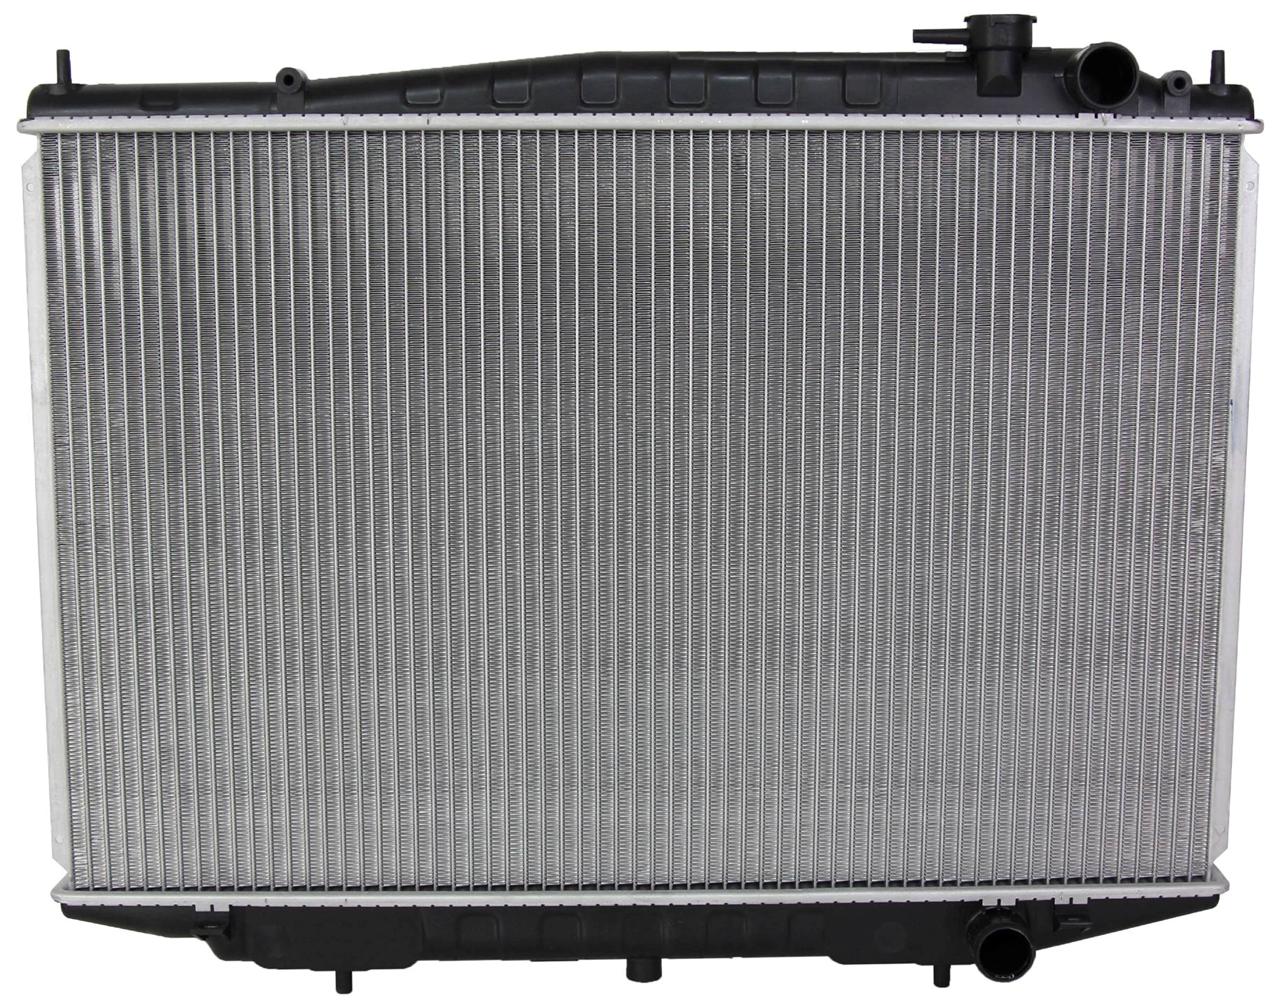 Rareelectrical NEW RADIATOR ASSEMBLY COMPATIBLE WITH NISSAN 98-04 FRONTIER XTERRA 2.4L 3.3L L4 V6 2389CC 3275CC 2696 21410-9Z010 NI3010108 7150